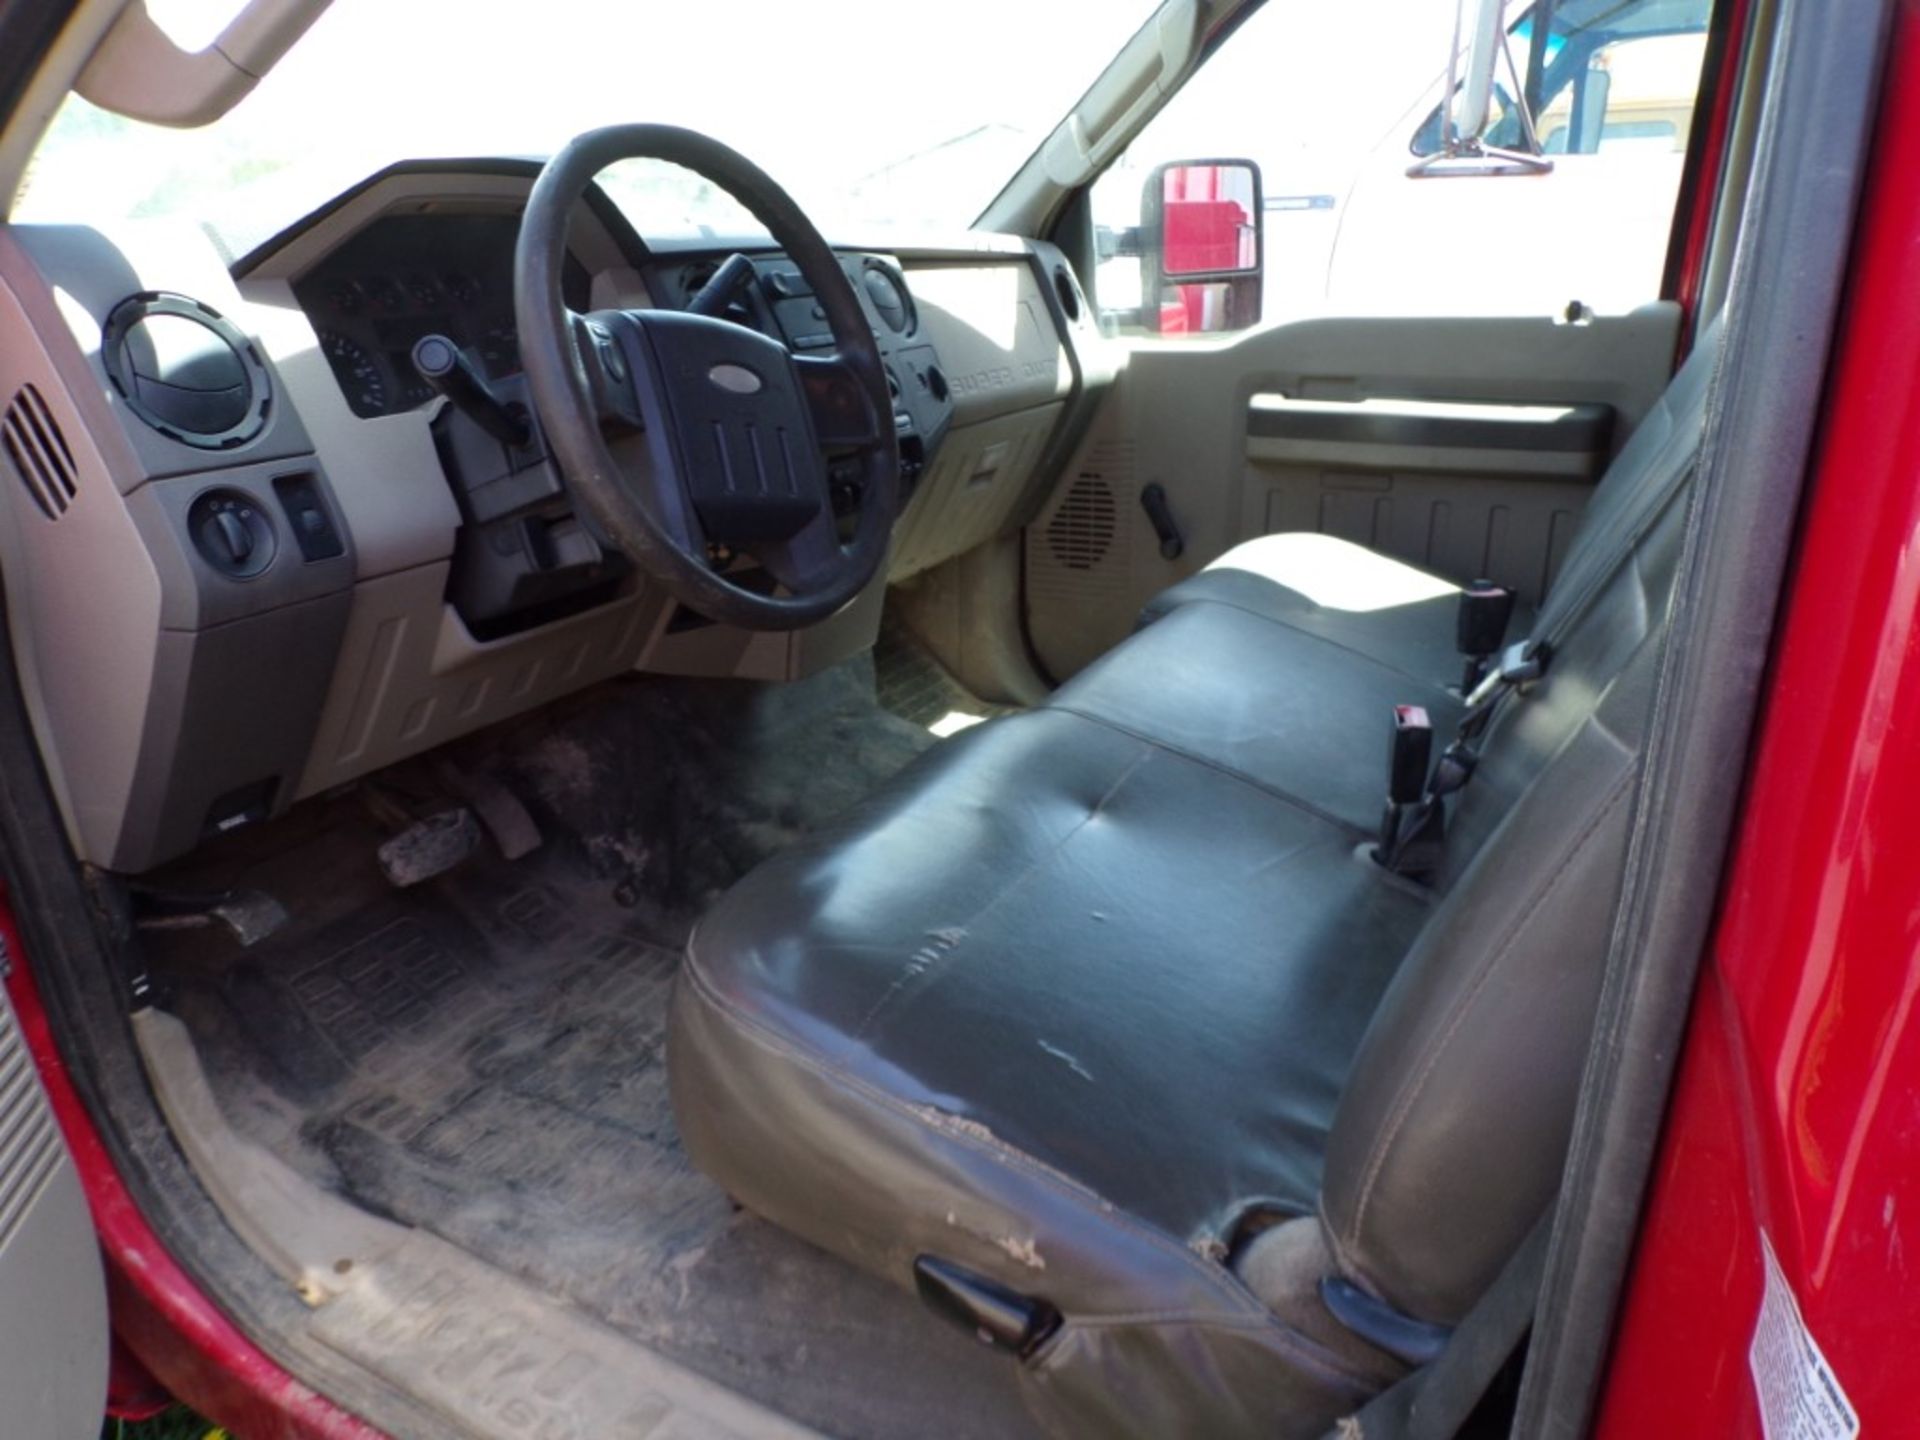 2010 Ford F-350 XL Regular Cab Utility Truck, Red, Reading Body, 78,858 Miles, Vin.# - Image 6 of 6